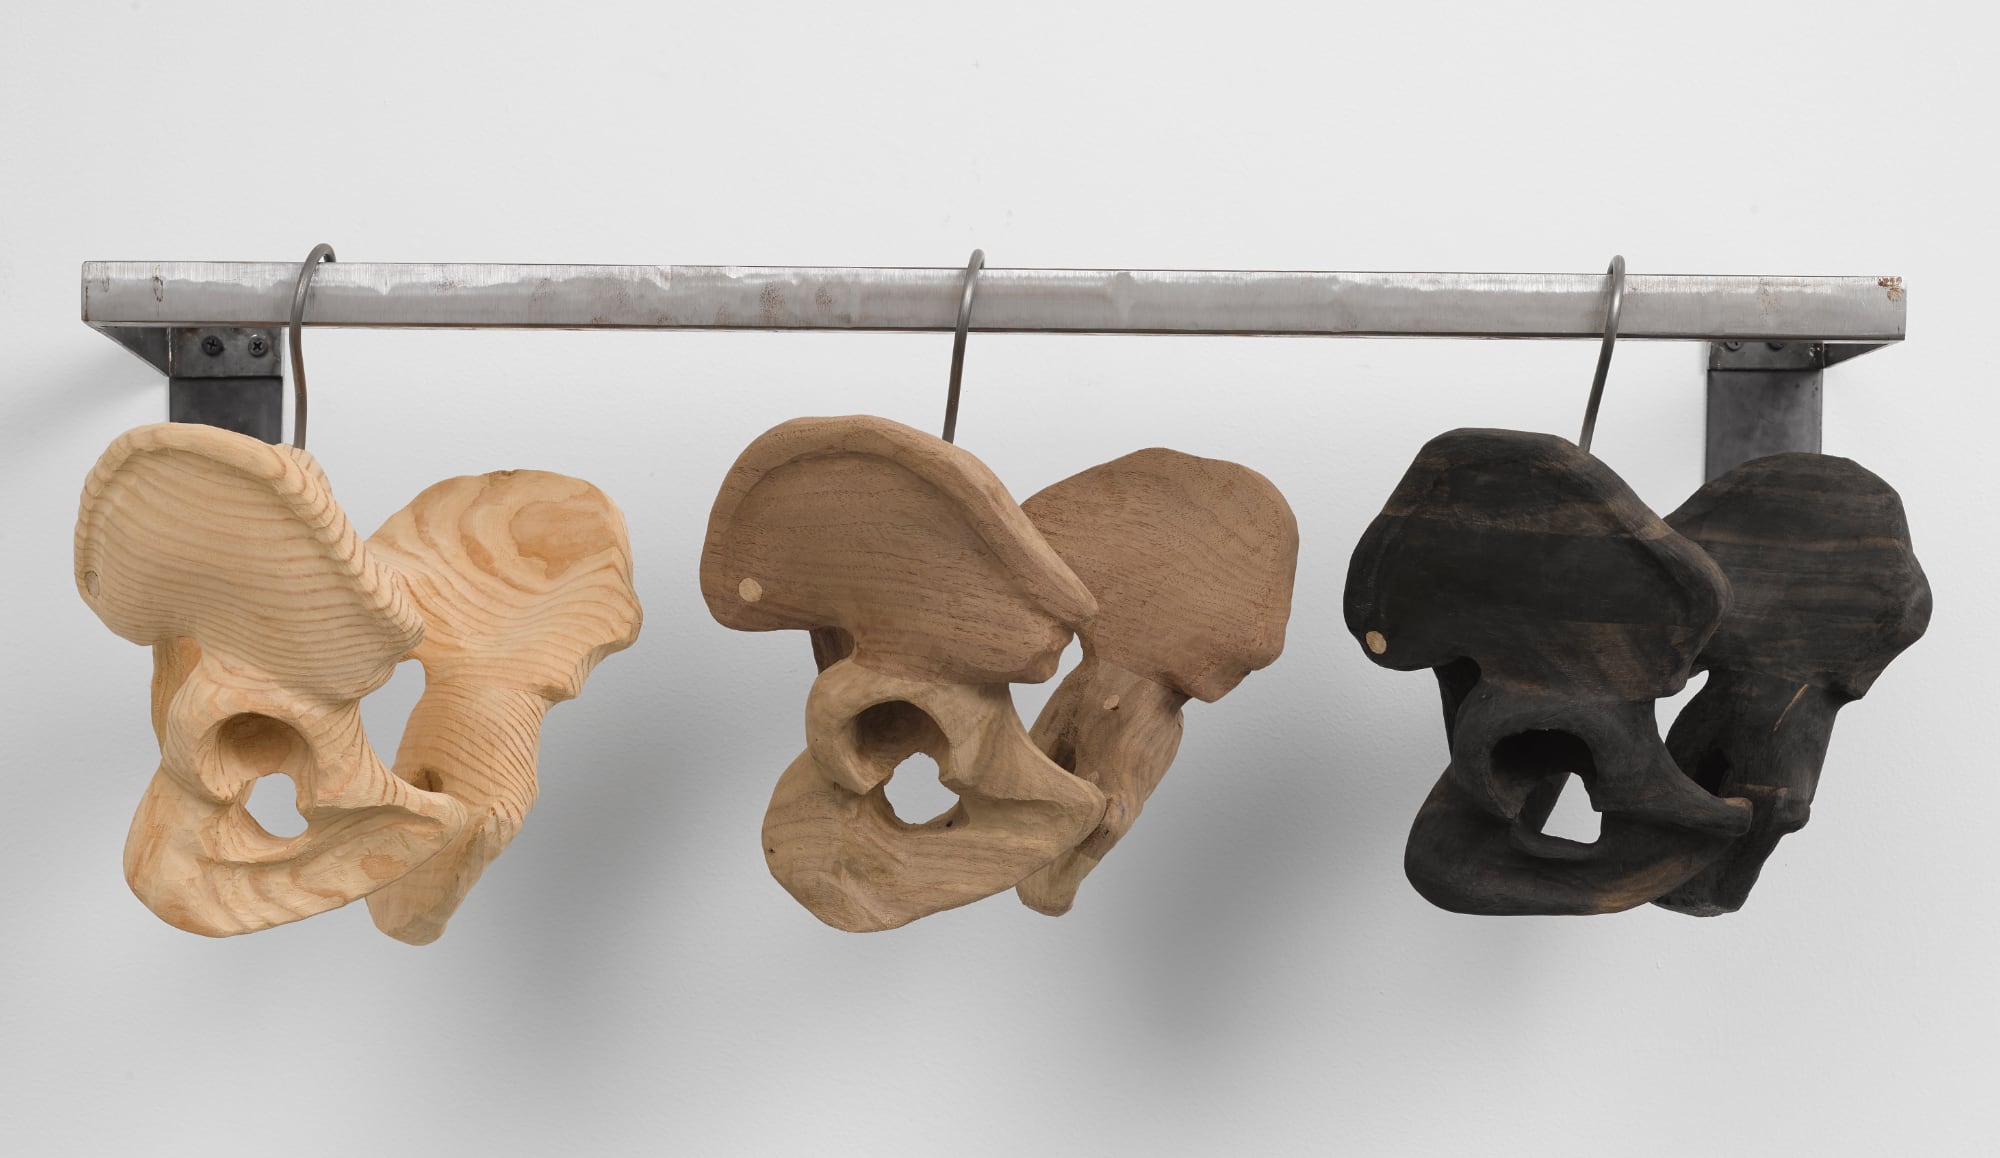 Three wooden basins in different shades hang from a rail